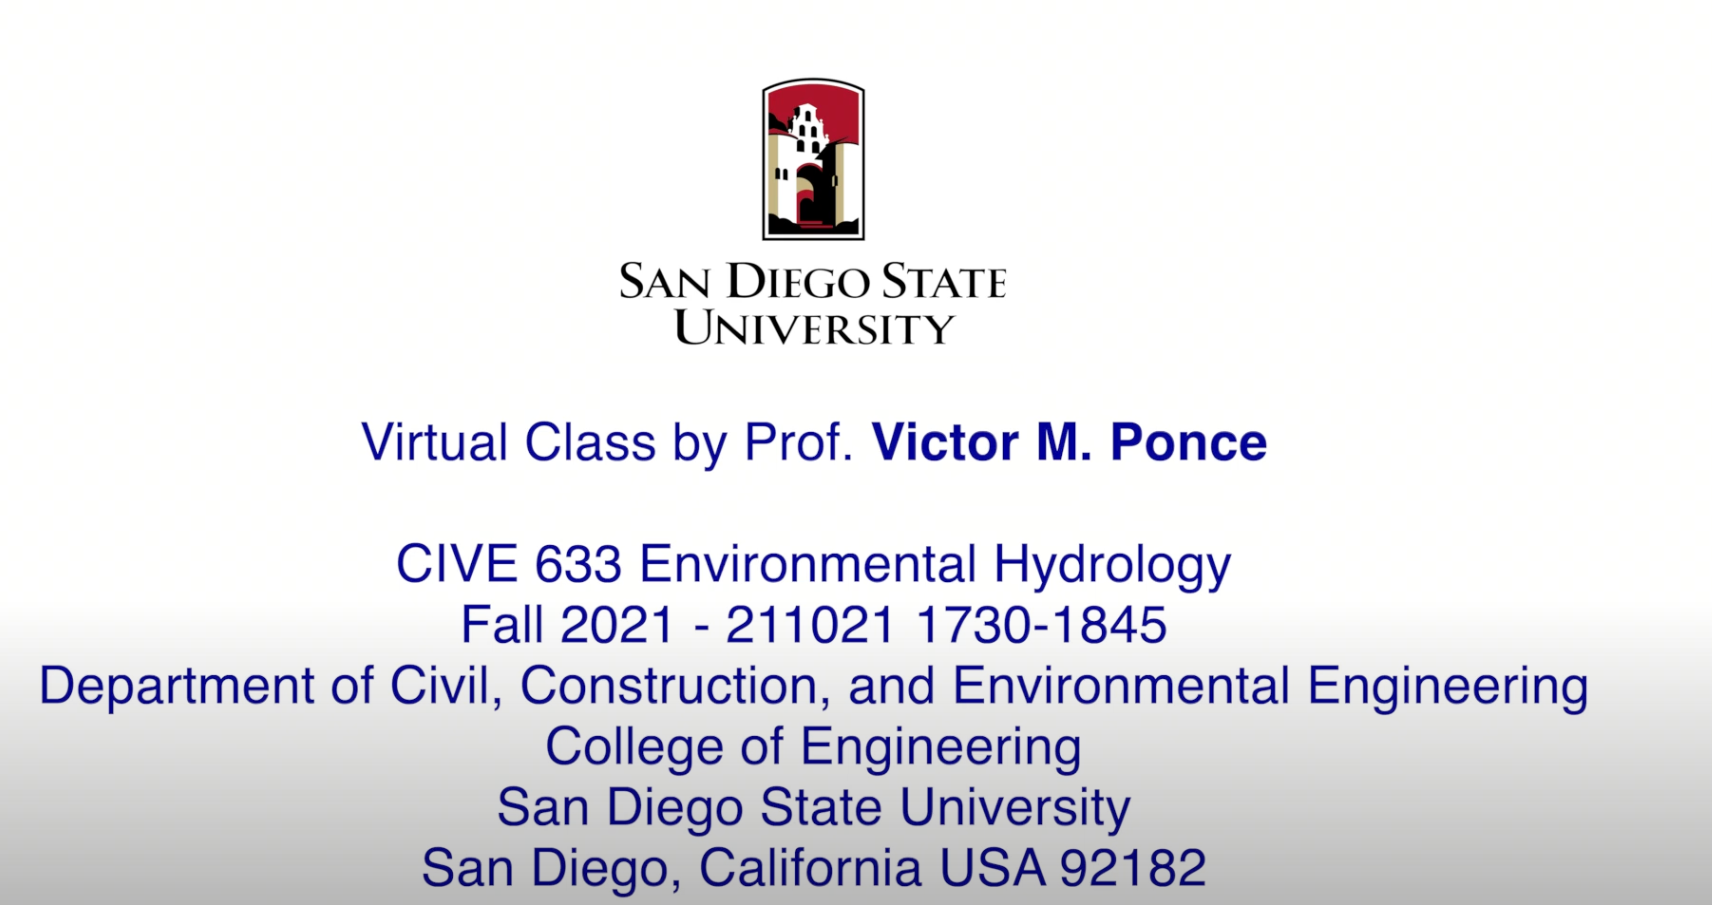 Virtual Lecture, 211021, CIVE633 Environmental Hydrology, by Prof. Victor M. Ponce, Fall 2021